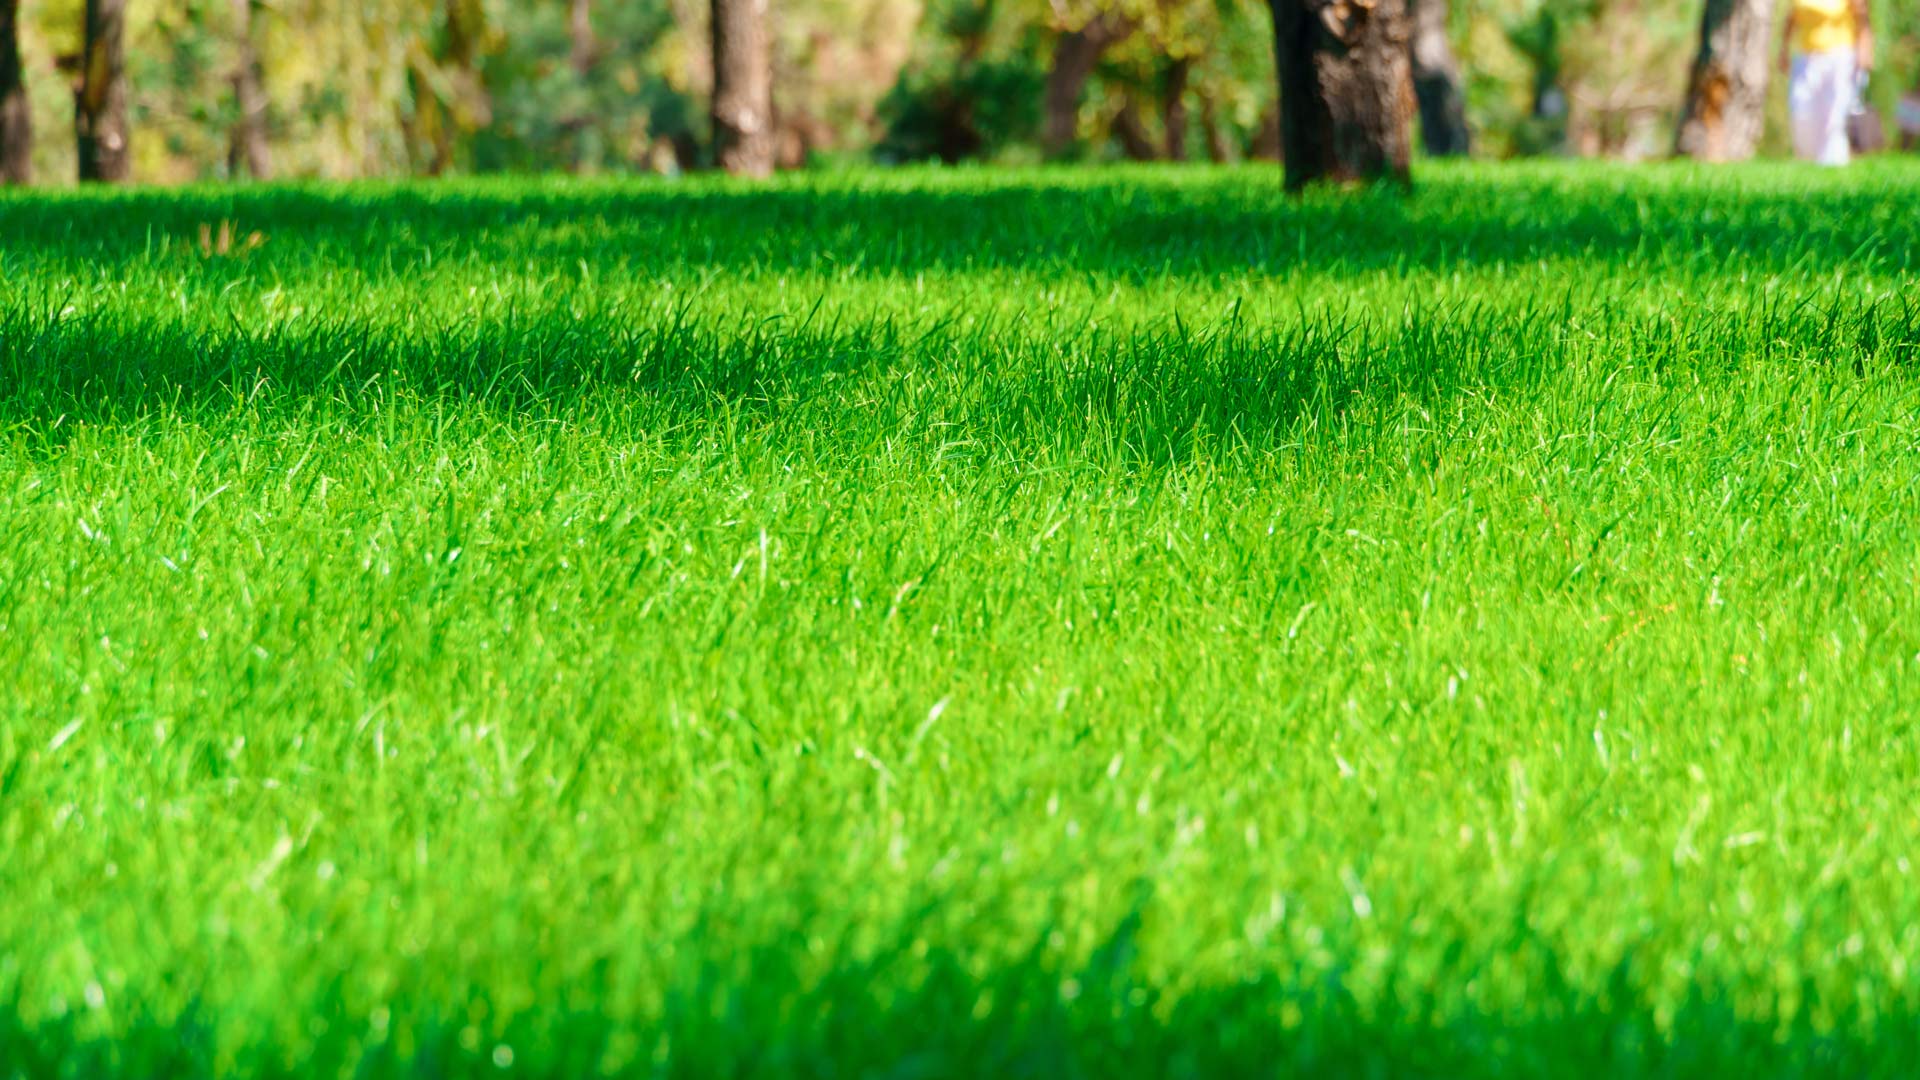 Make Sure That You Fertilize Your Lawn Twice This Spring!